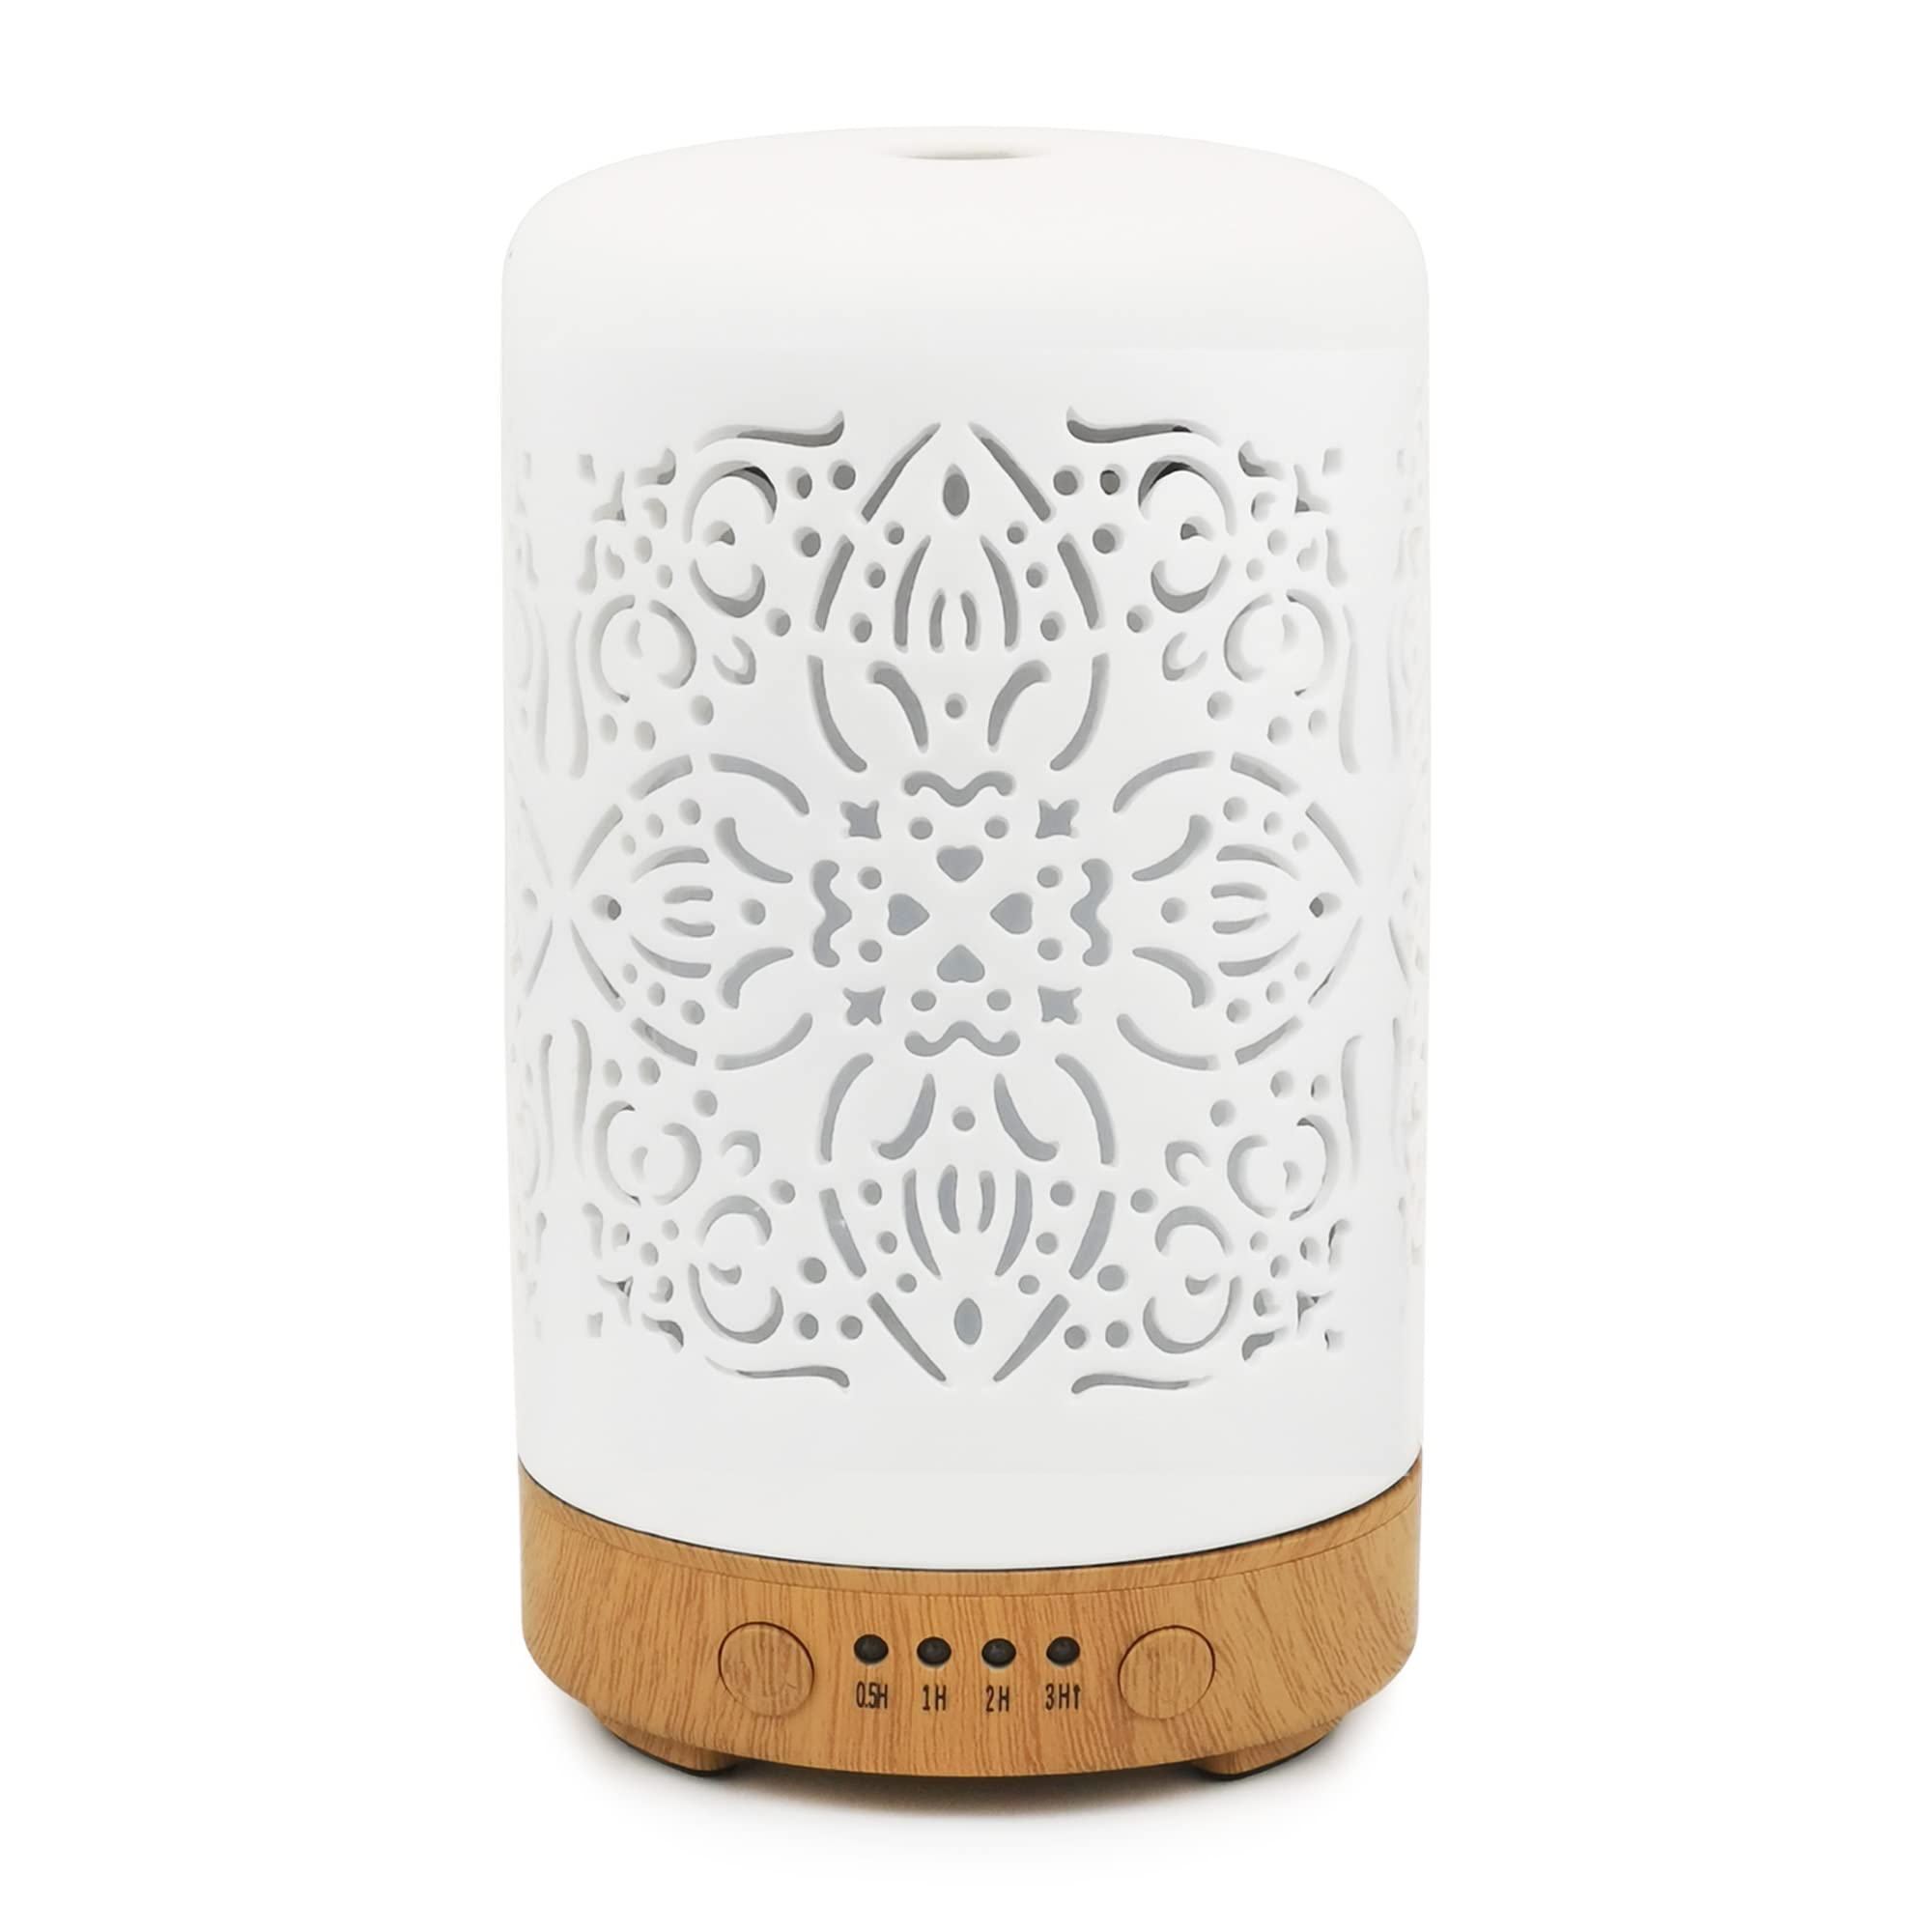 Mua Earnest Living Essential Oil Diffuser White Ceramic Diffuser 100 ml  Timers Night Lights and Auto Off Function Home Office Humidifier  Aromatherapy Diffusers for Essential Oils trên Amazon Mỹ chính hãng 2023 |  Giaonhan247